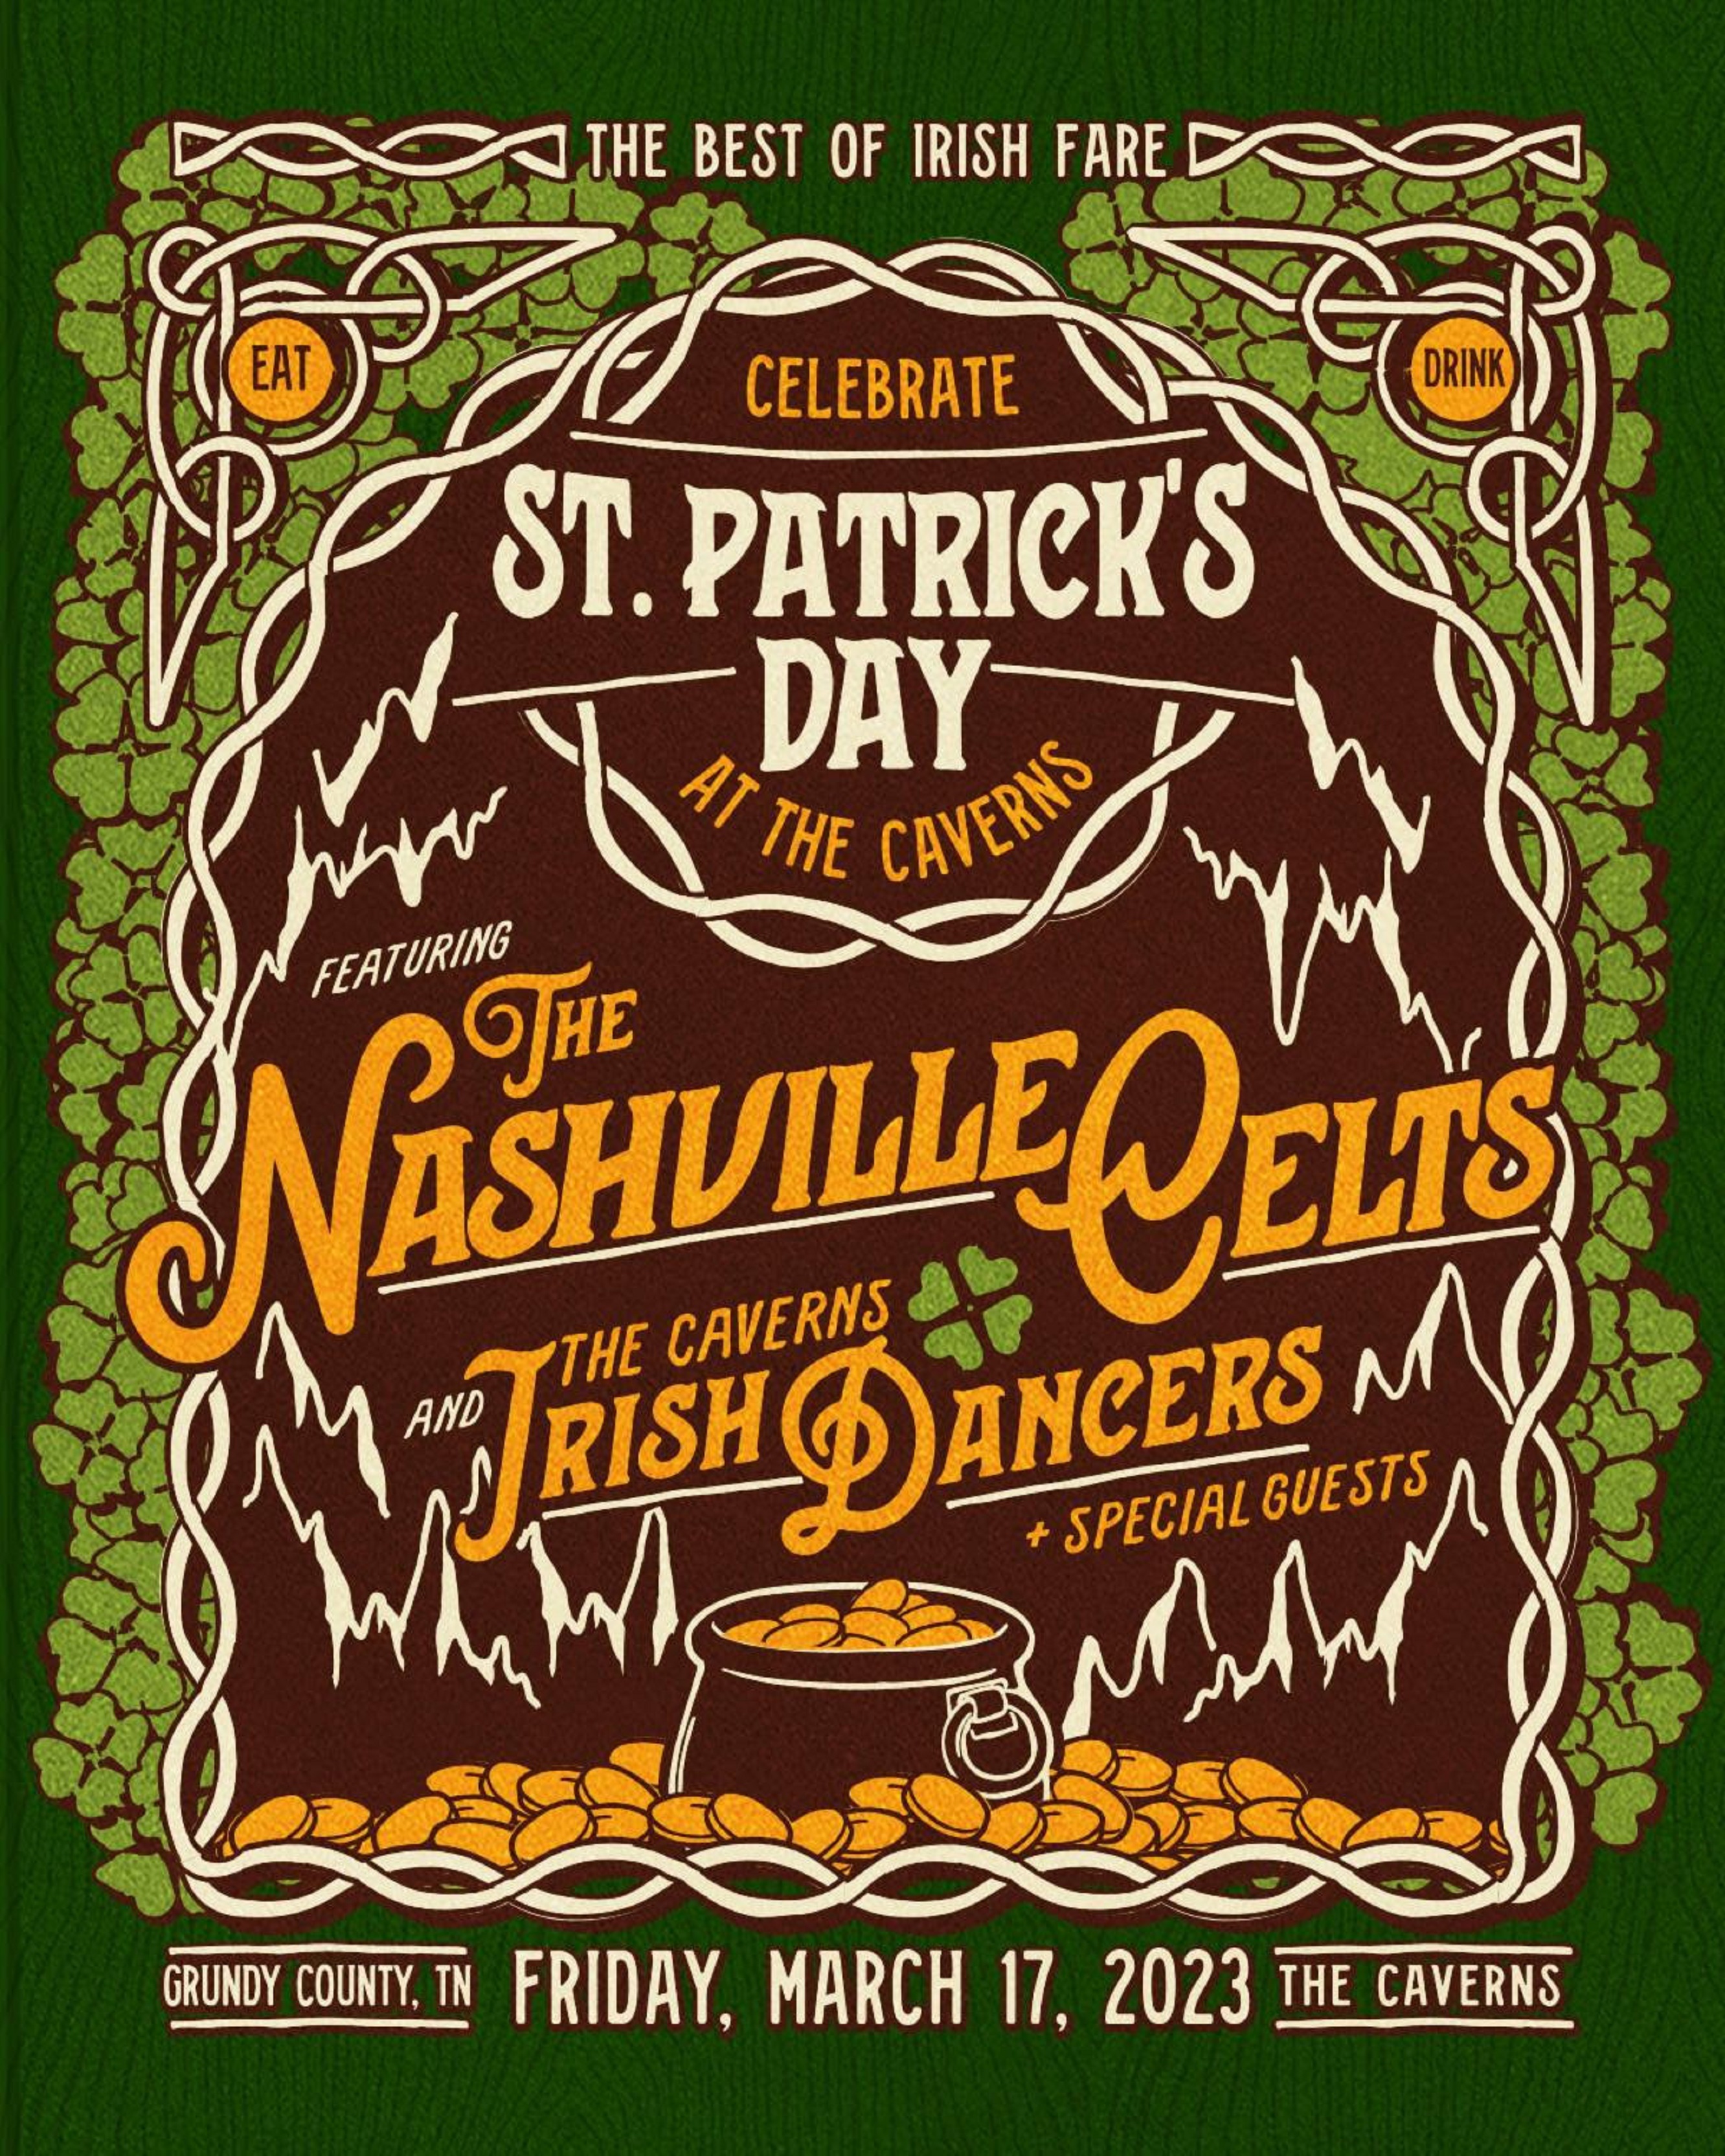 St. Patrick's Day in a Cave! The Caverns Hosts An Irish Celebration with The Nashville Celts & More